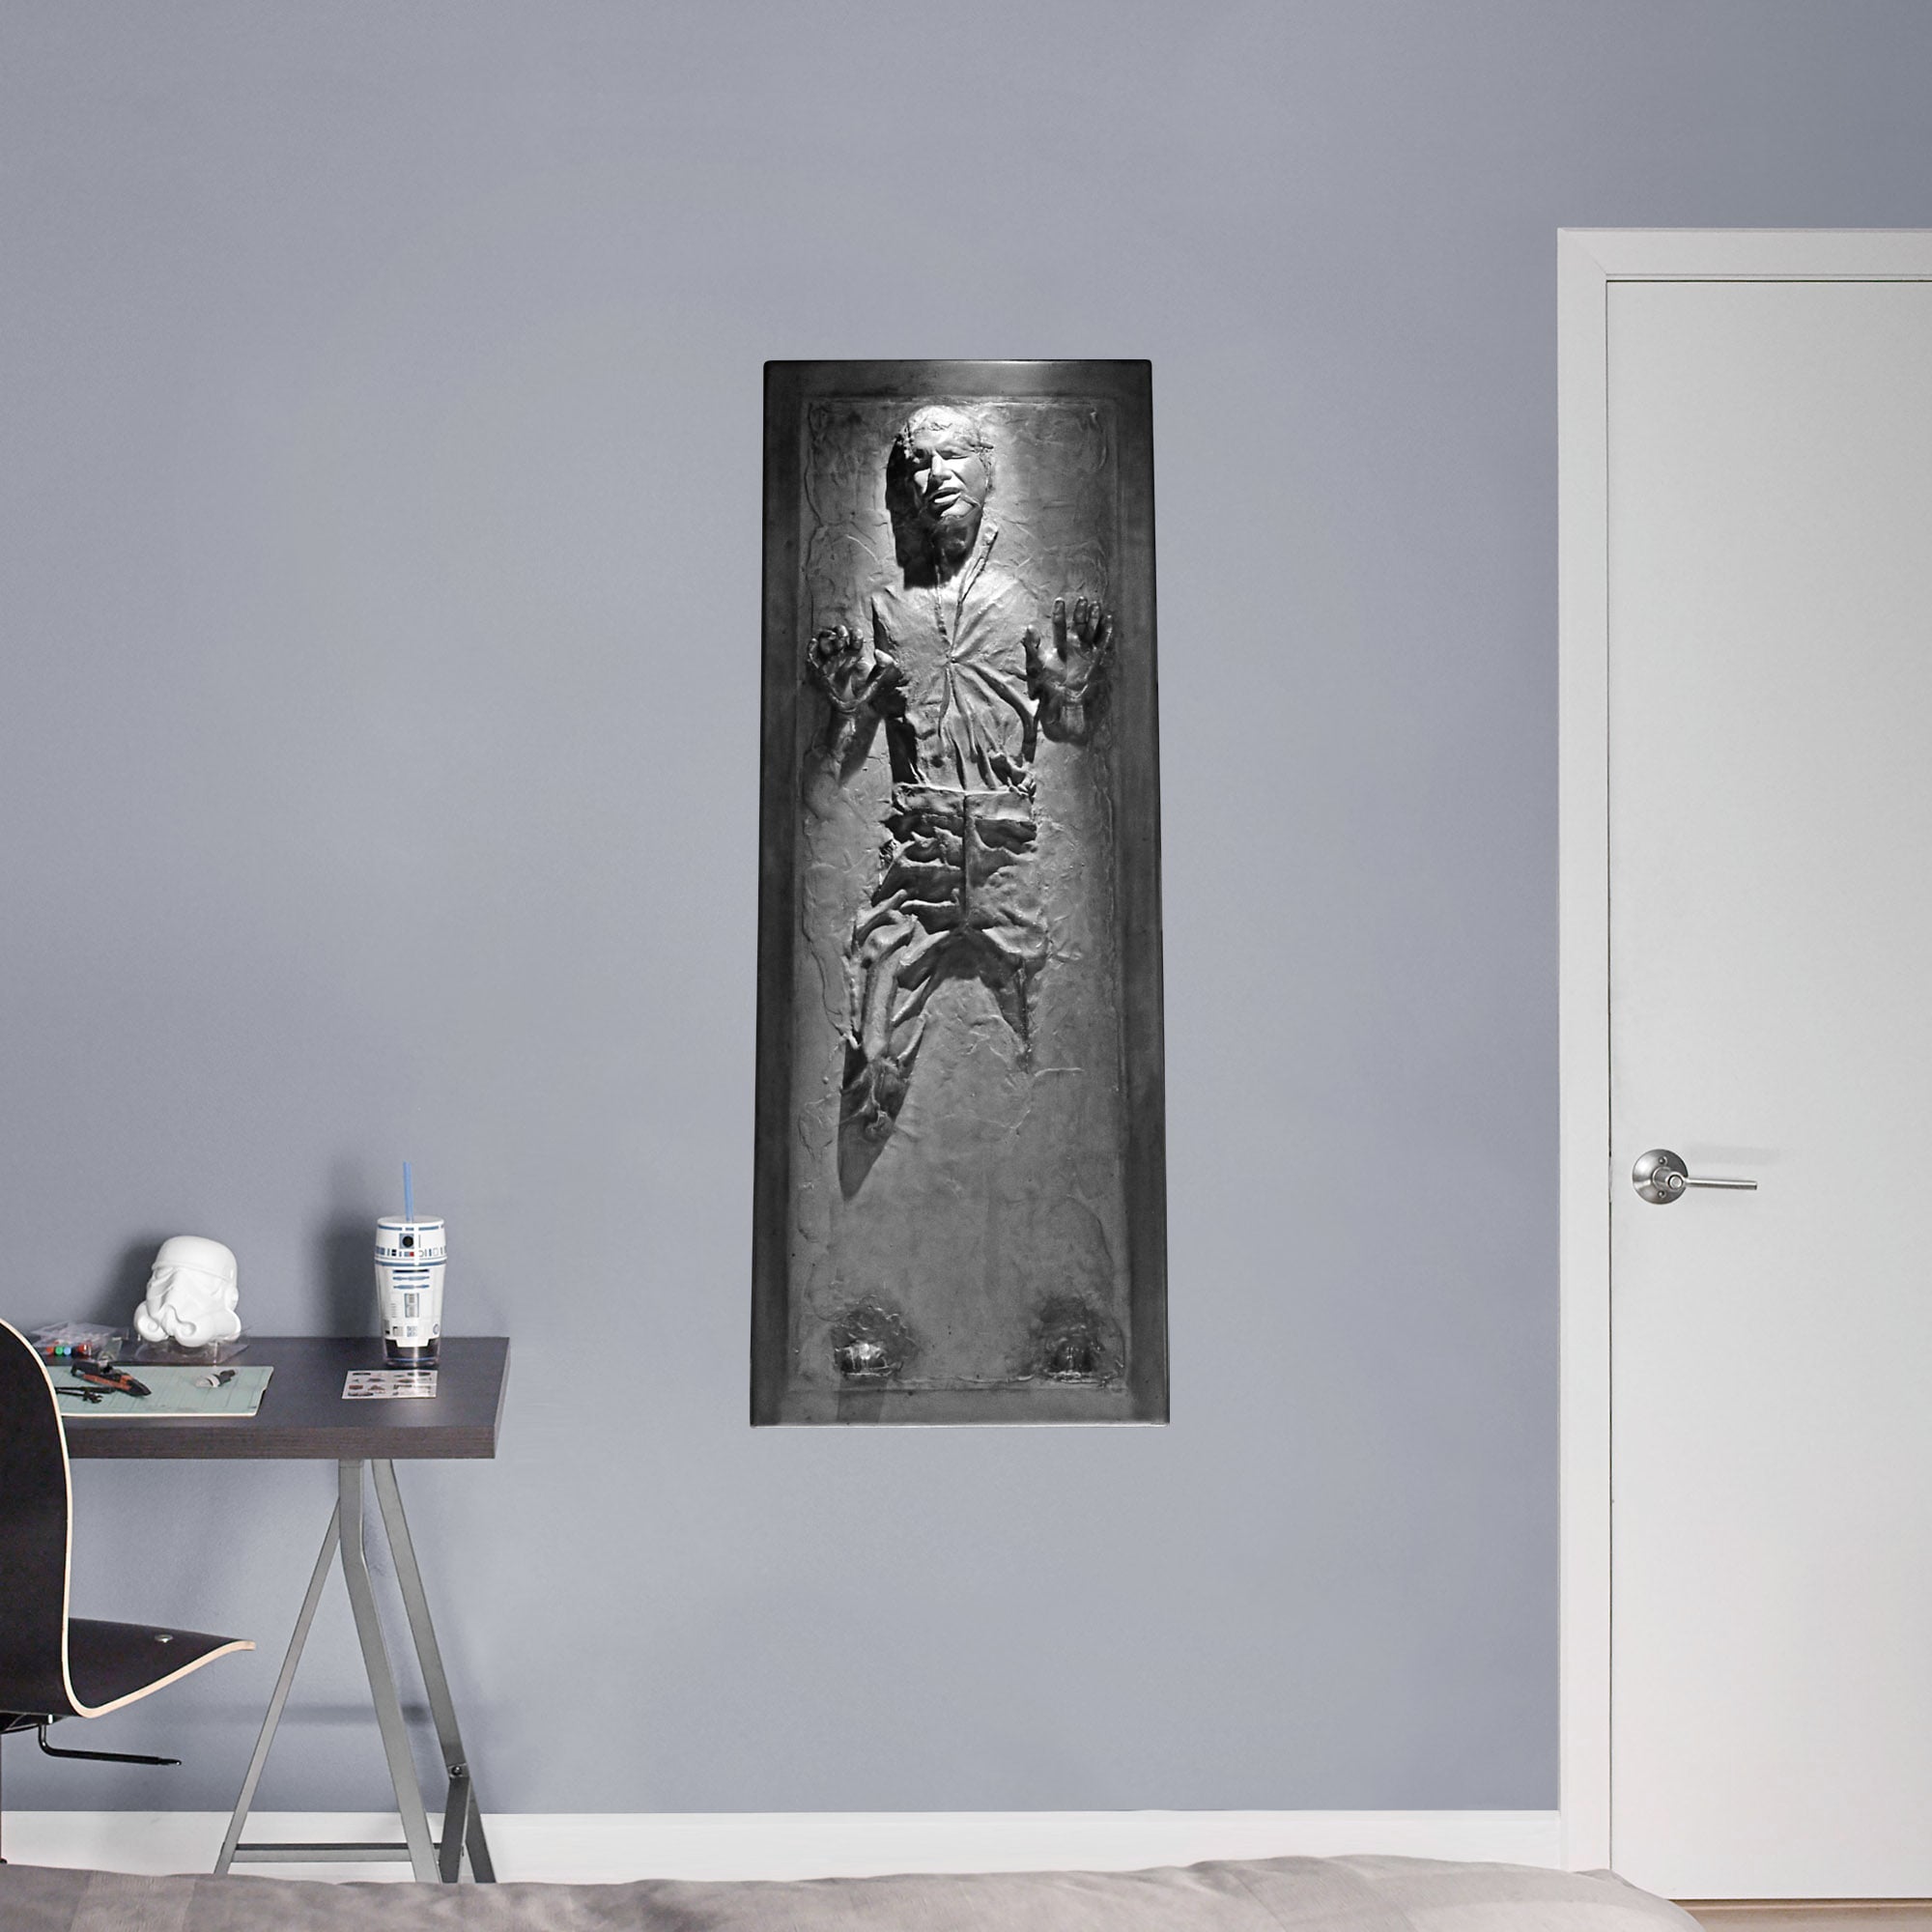 Han Solo: In Carbonite - Officially Licensed Removable Wall Decal Giant Character + 2 Decals (20"W x 51"H) by Fathead | Vinyl